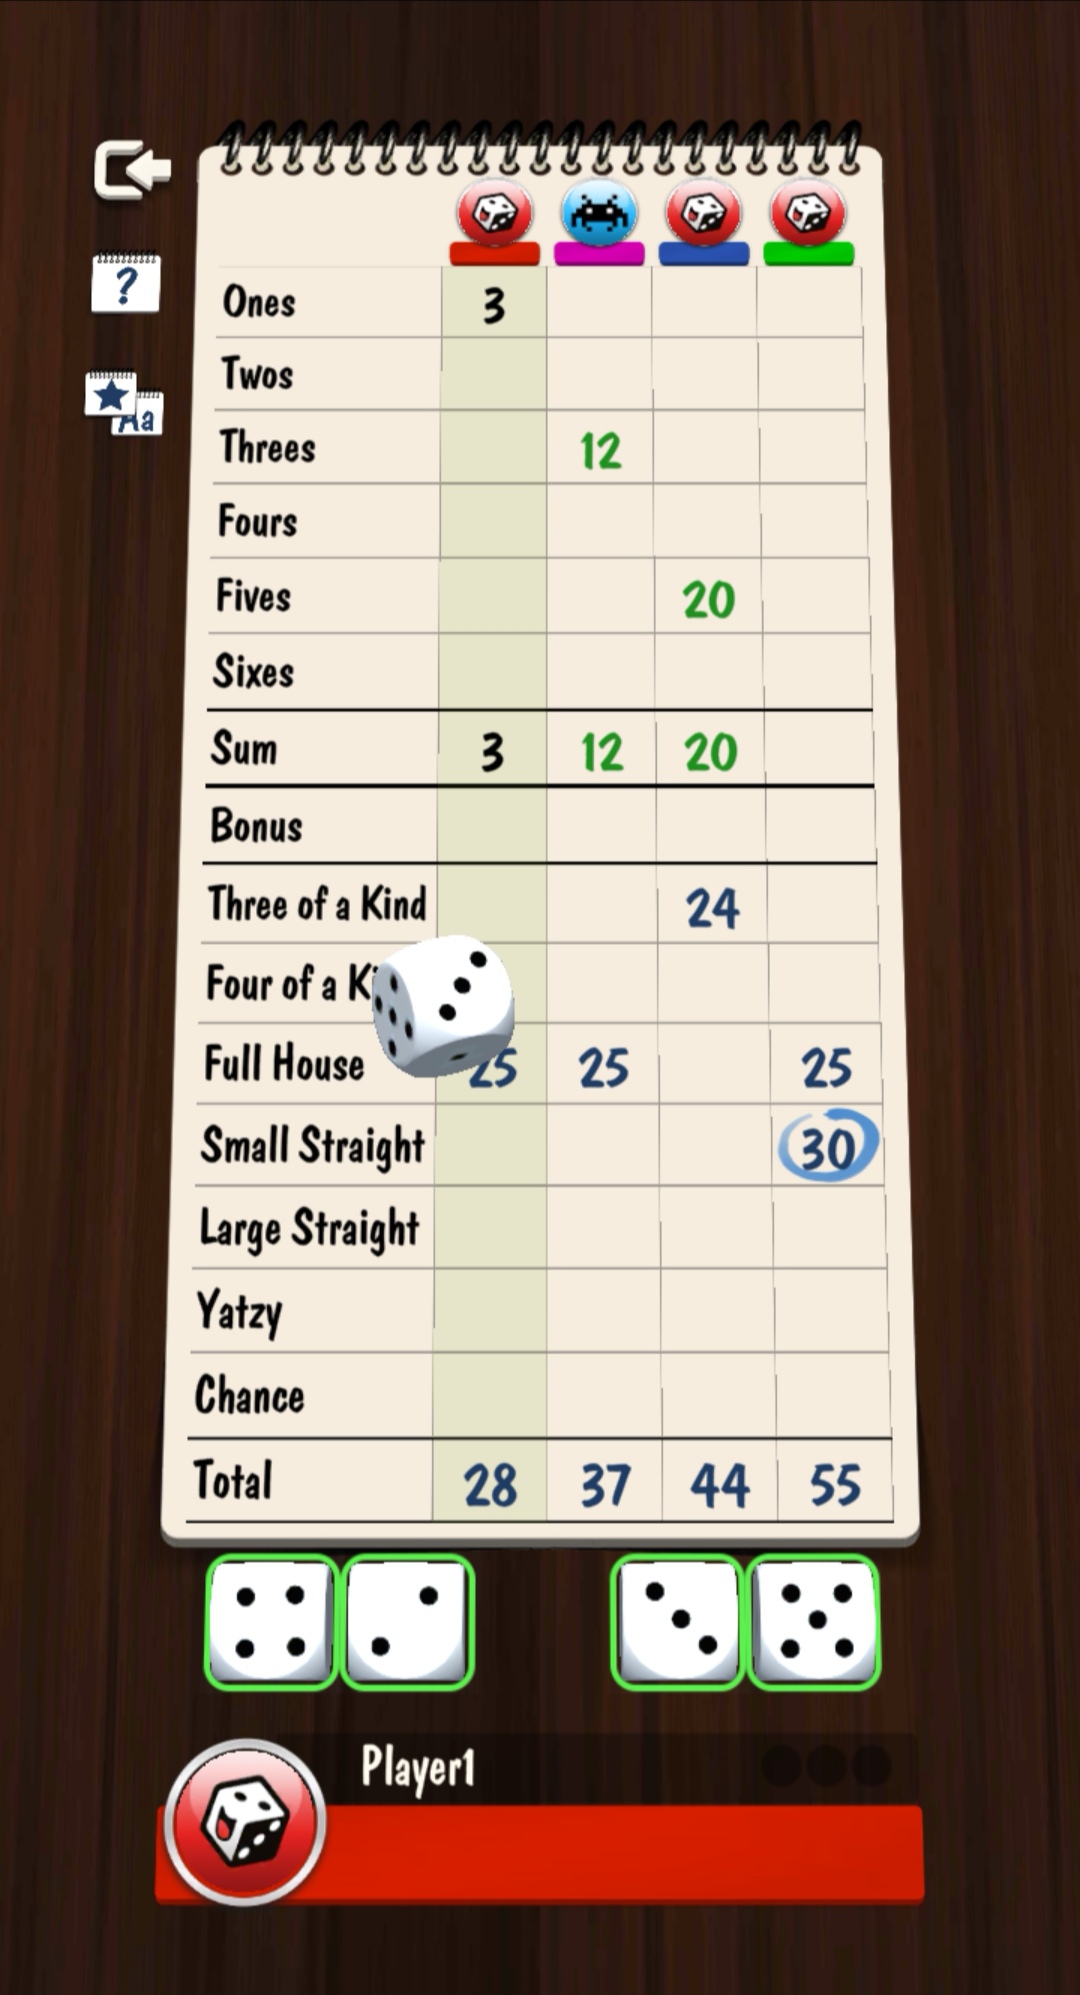 Android application Yatzy Multiplayer Dice Game screenshort